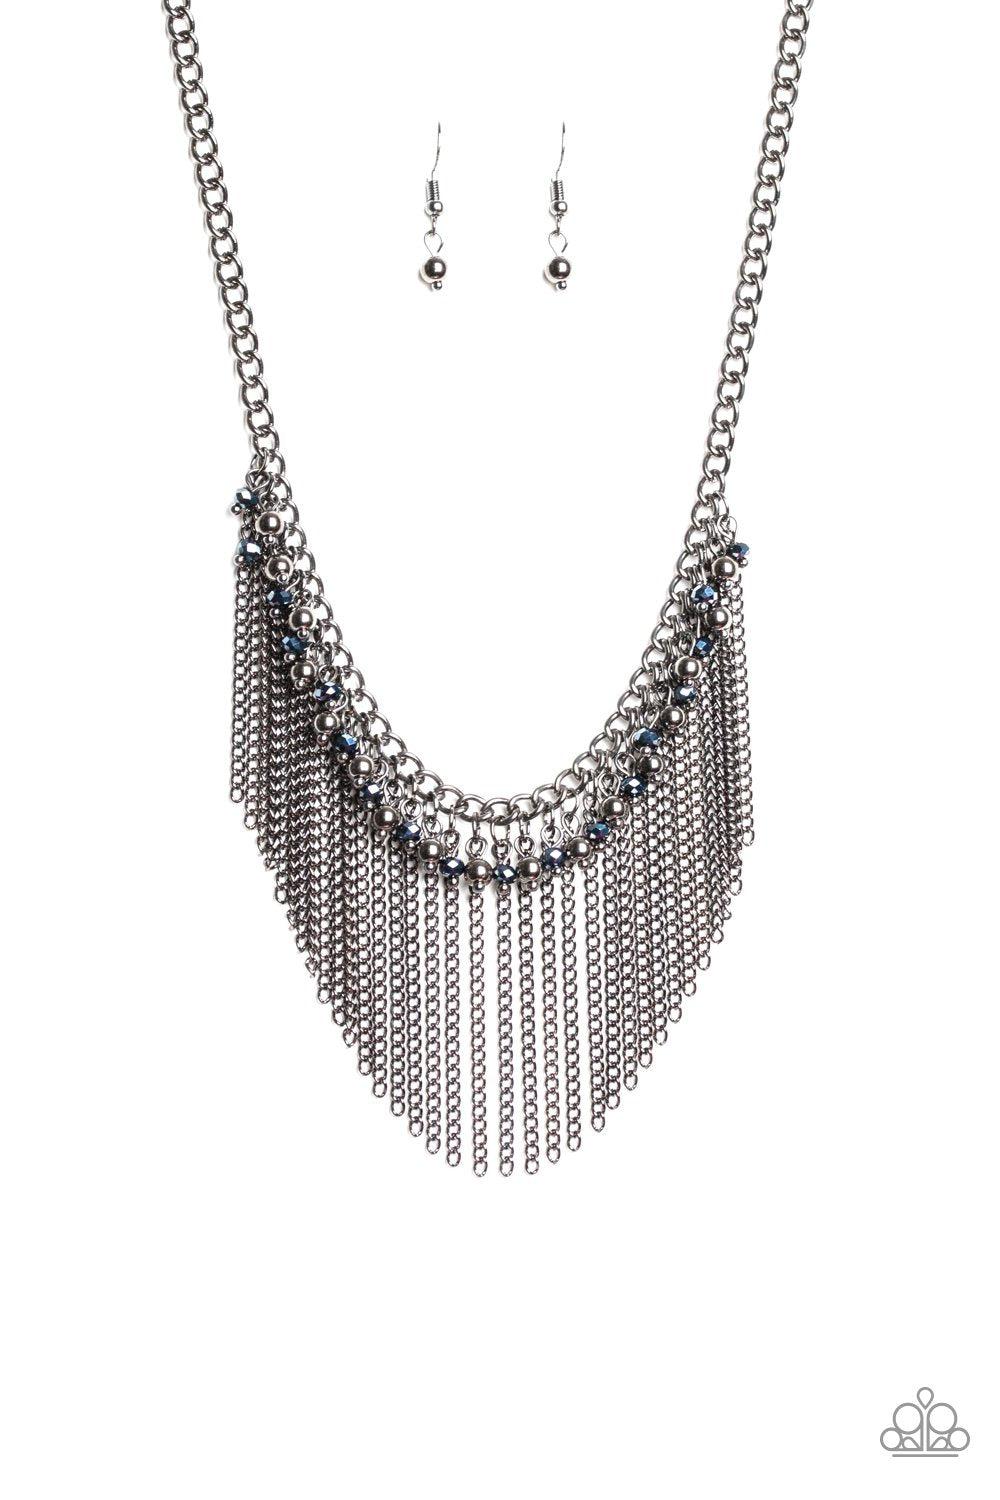 Divinely Diva Blue and Gunmetal Necklace - Paparazzi Accessories - lightbox -CarasShop.com - $5 Jewelry by Cara Jewels